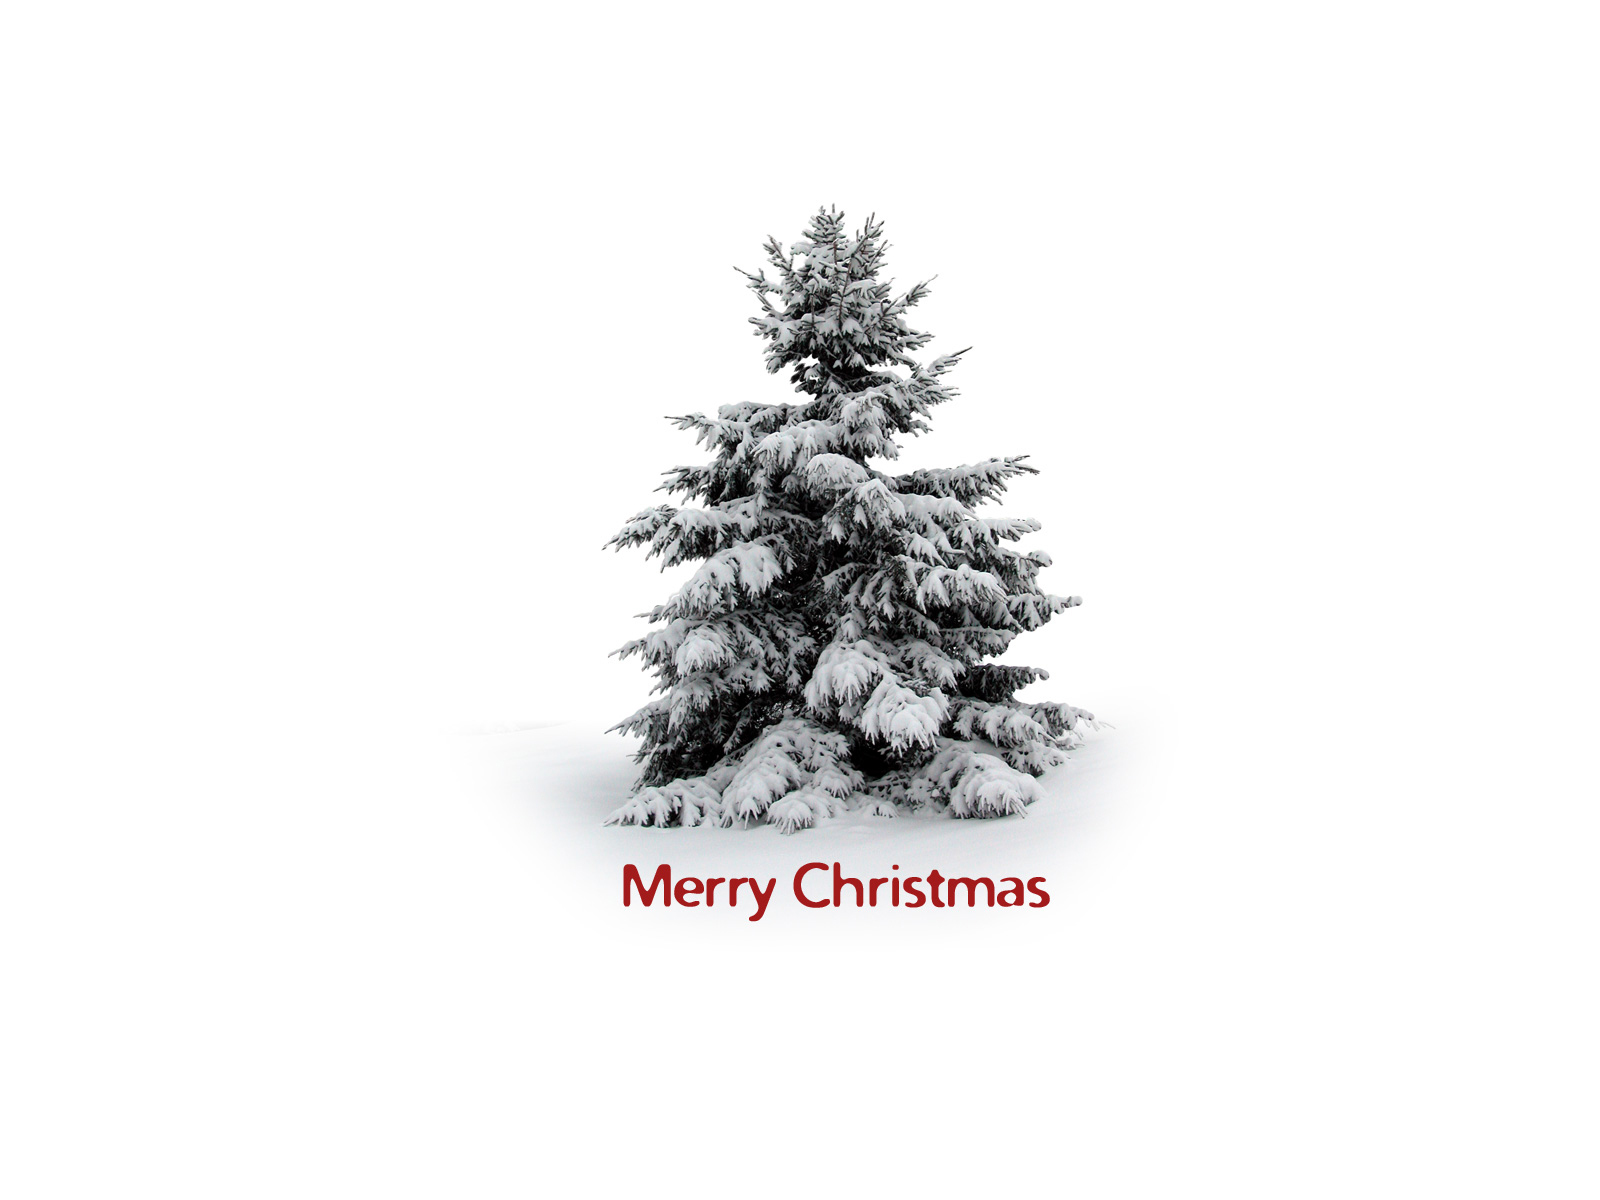 1920x1080 Background christmas xmas, holidays, winter, trees, new year, snow, fir trees, white